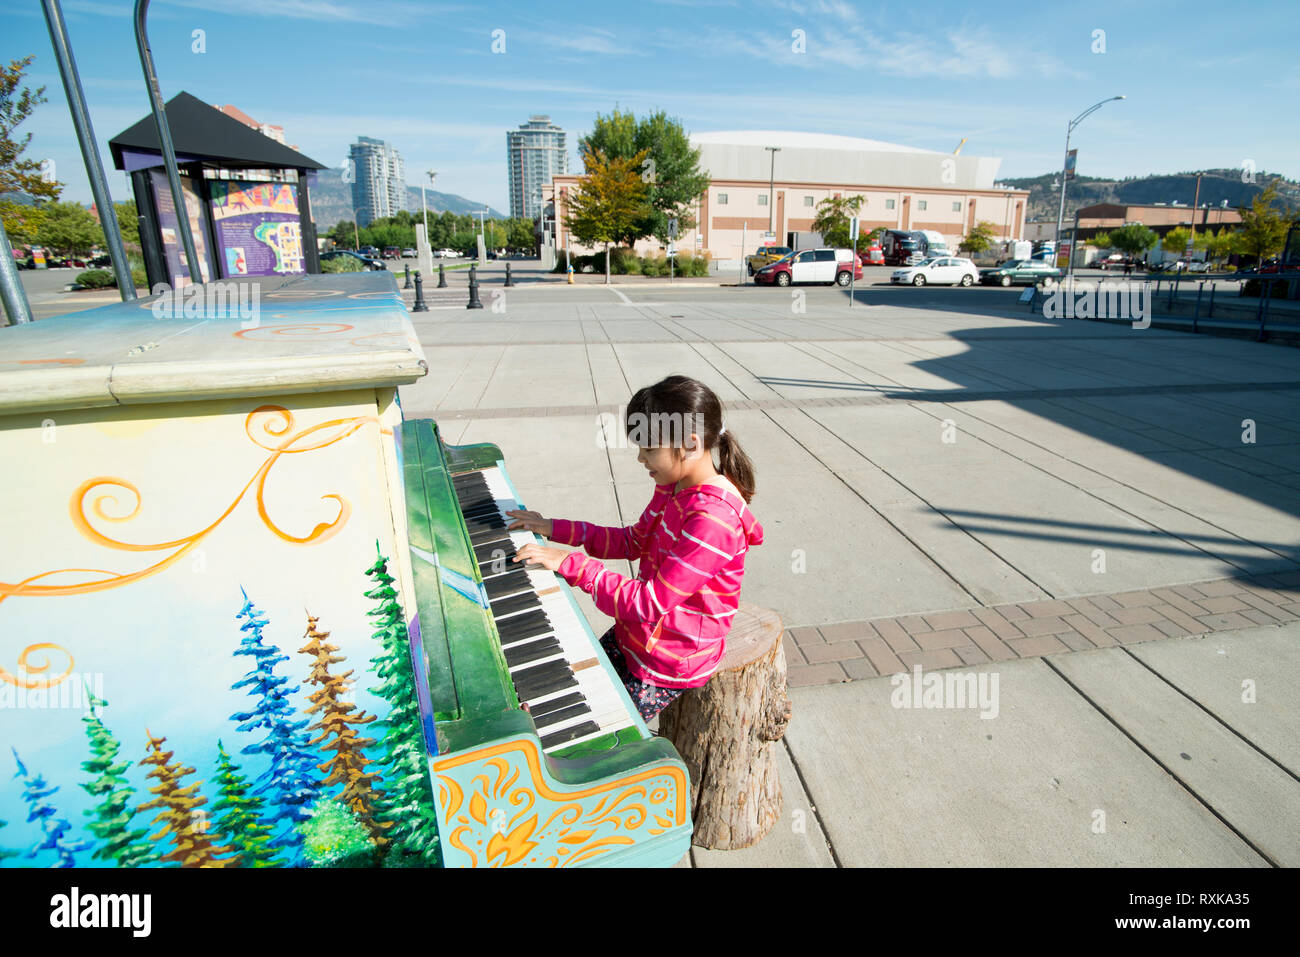 A young girl plays a public piano in Kelowna, British Columbia, Canada Stock Photo